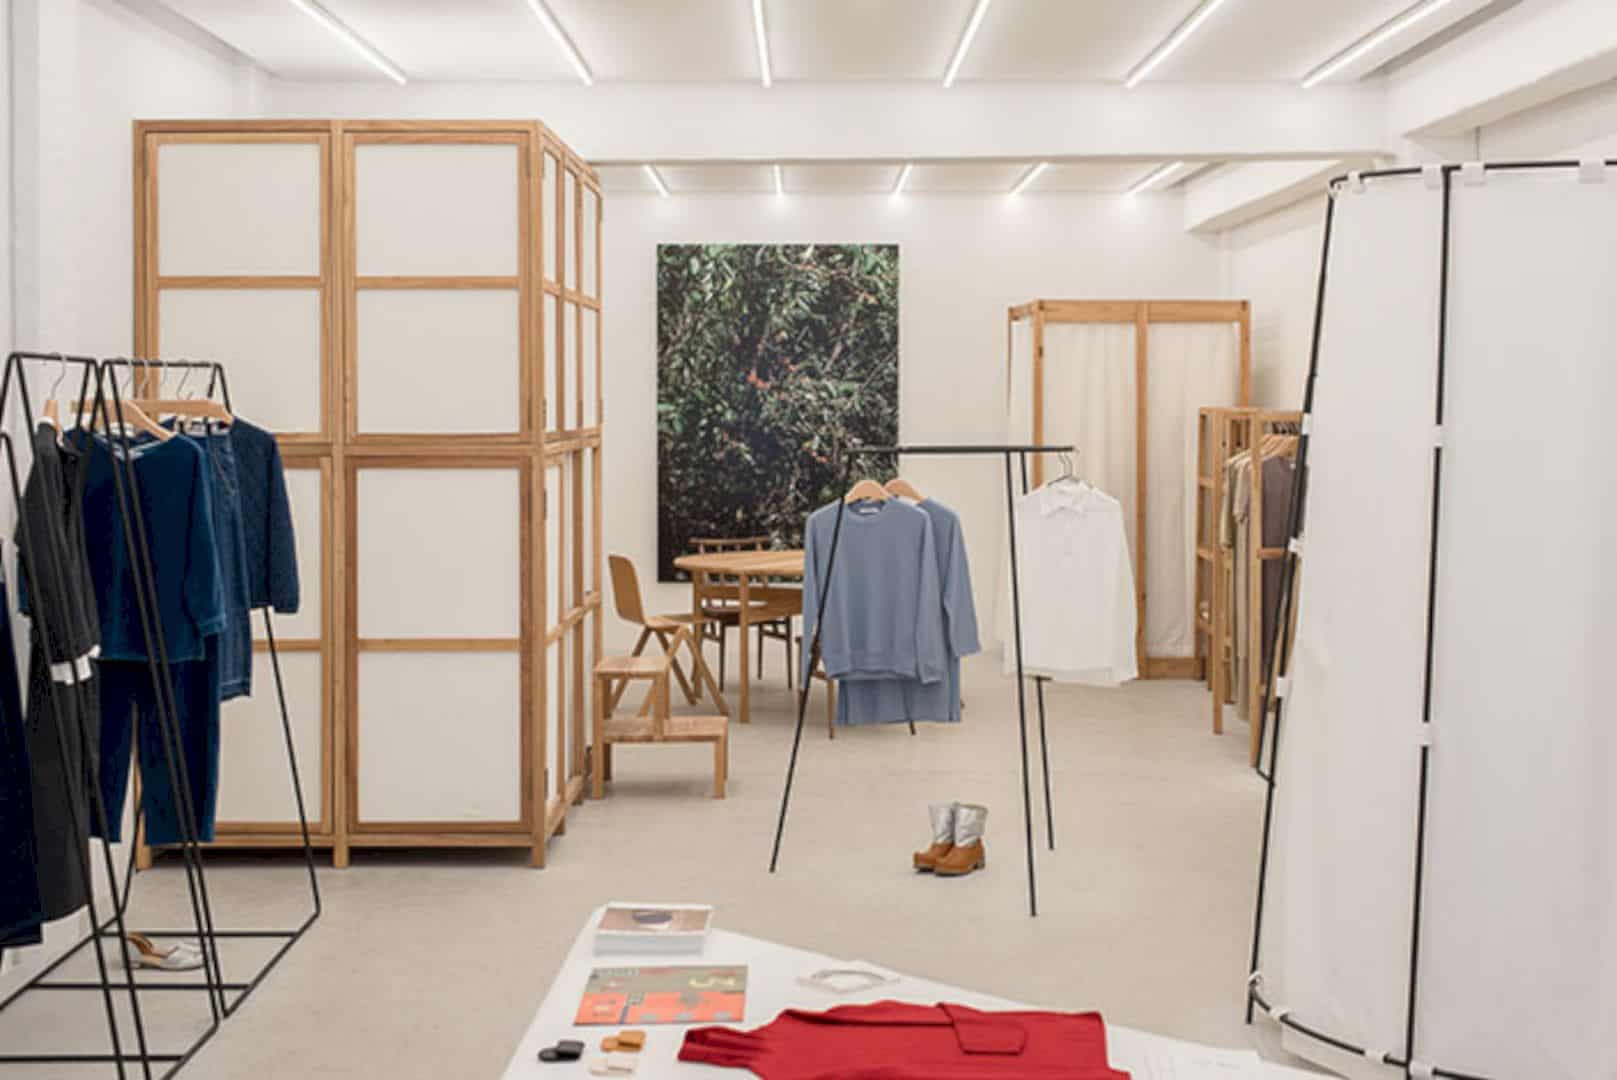 Klee Klee A Clothing Store To Reconnect With Natural Rhythm And Lifestyle 4